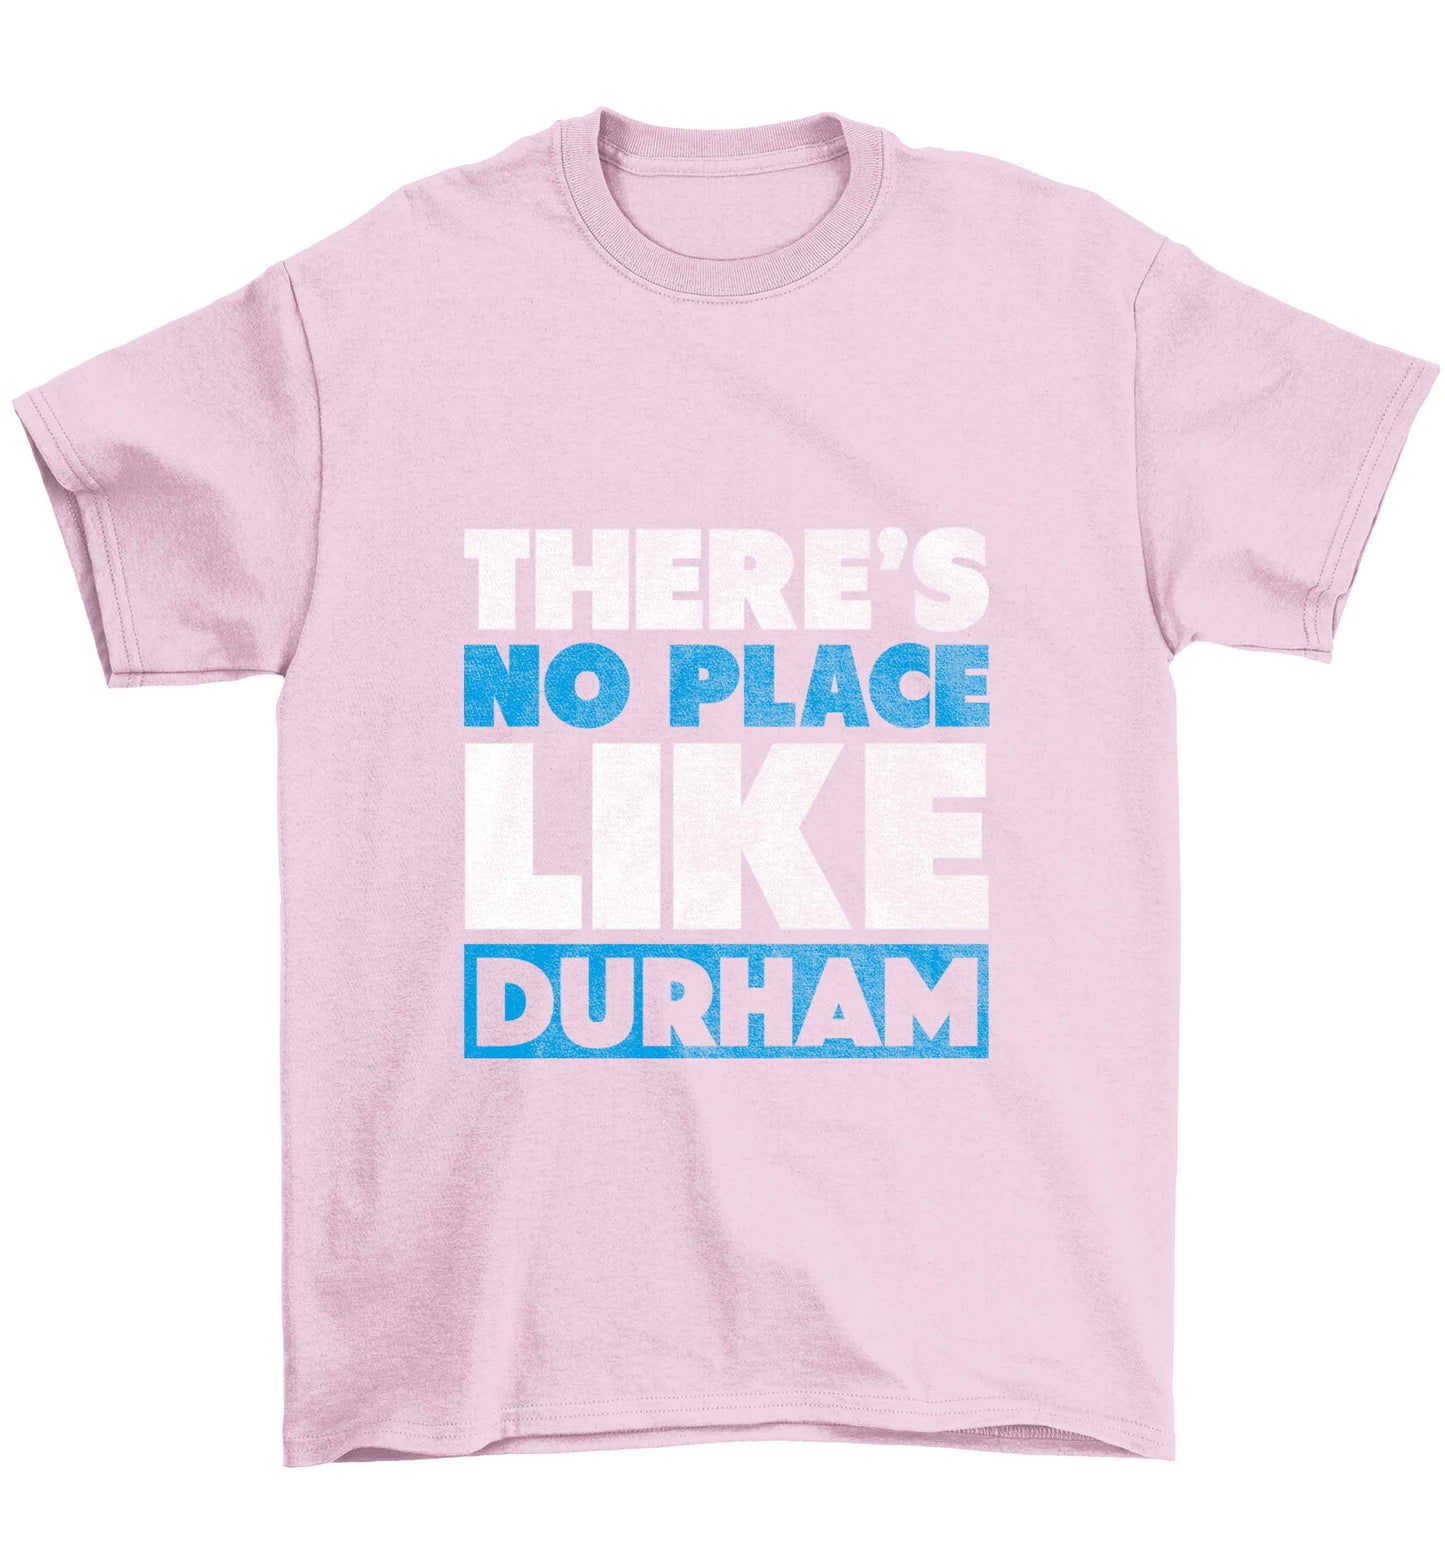 There's no place like Durham Children's light pink Tshirt 12-13 Years